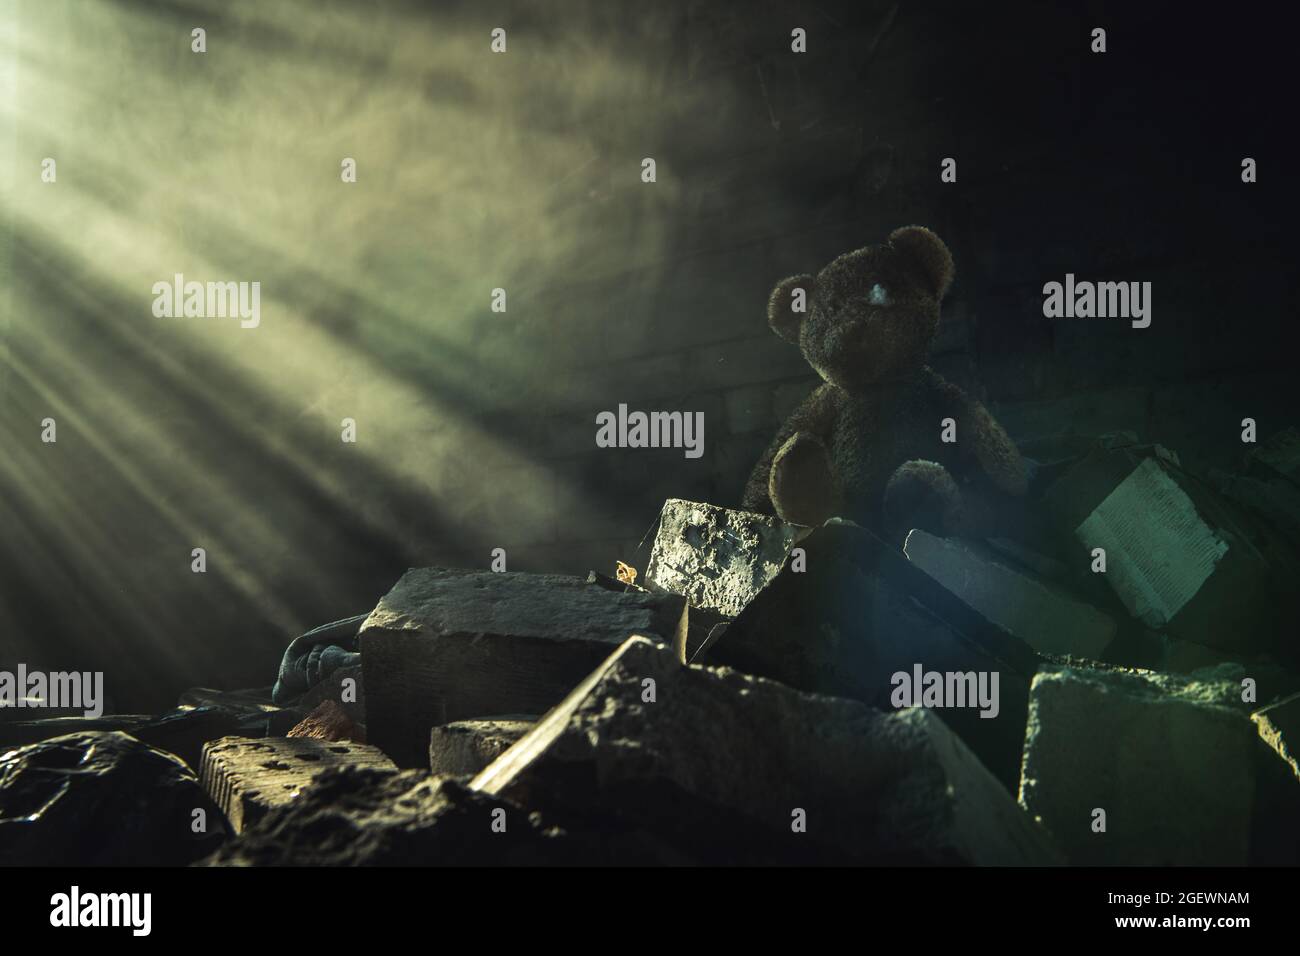 Dirty Damaged Teddy Bear Inside Abandoned House Ruins Brighten Up by Sunlight Coming Through a Structure Window Giving New Hopes. Stock Photo